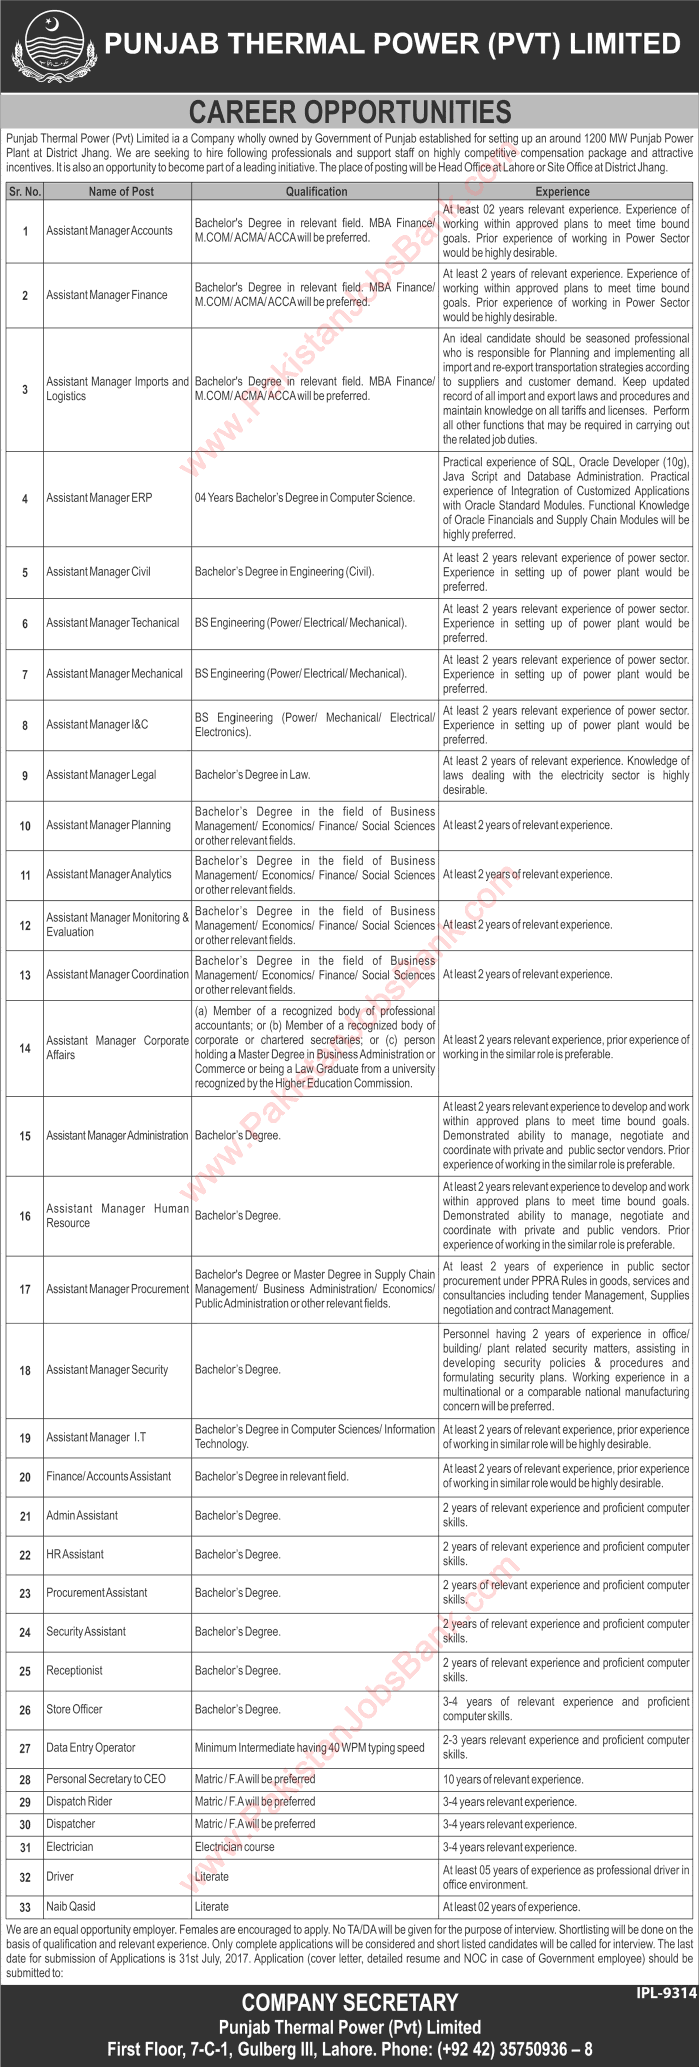 Punjab Thermal Power Pvt Ltd Jobs July 2017 Assistant Managers, HR / Admin Assistants, DEO & Others Latest